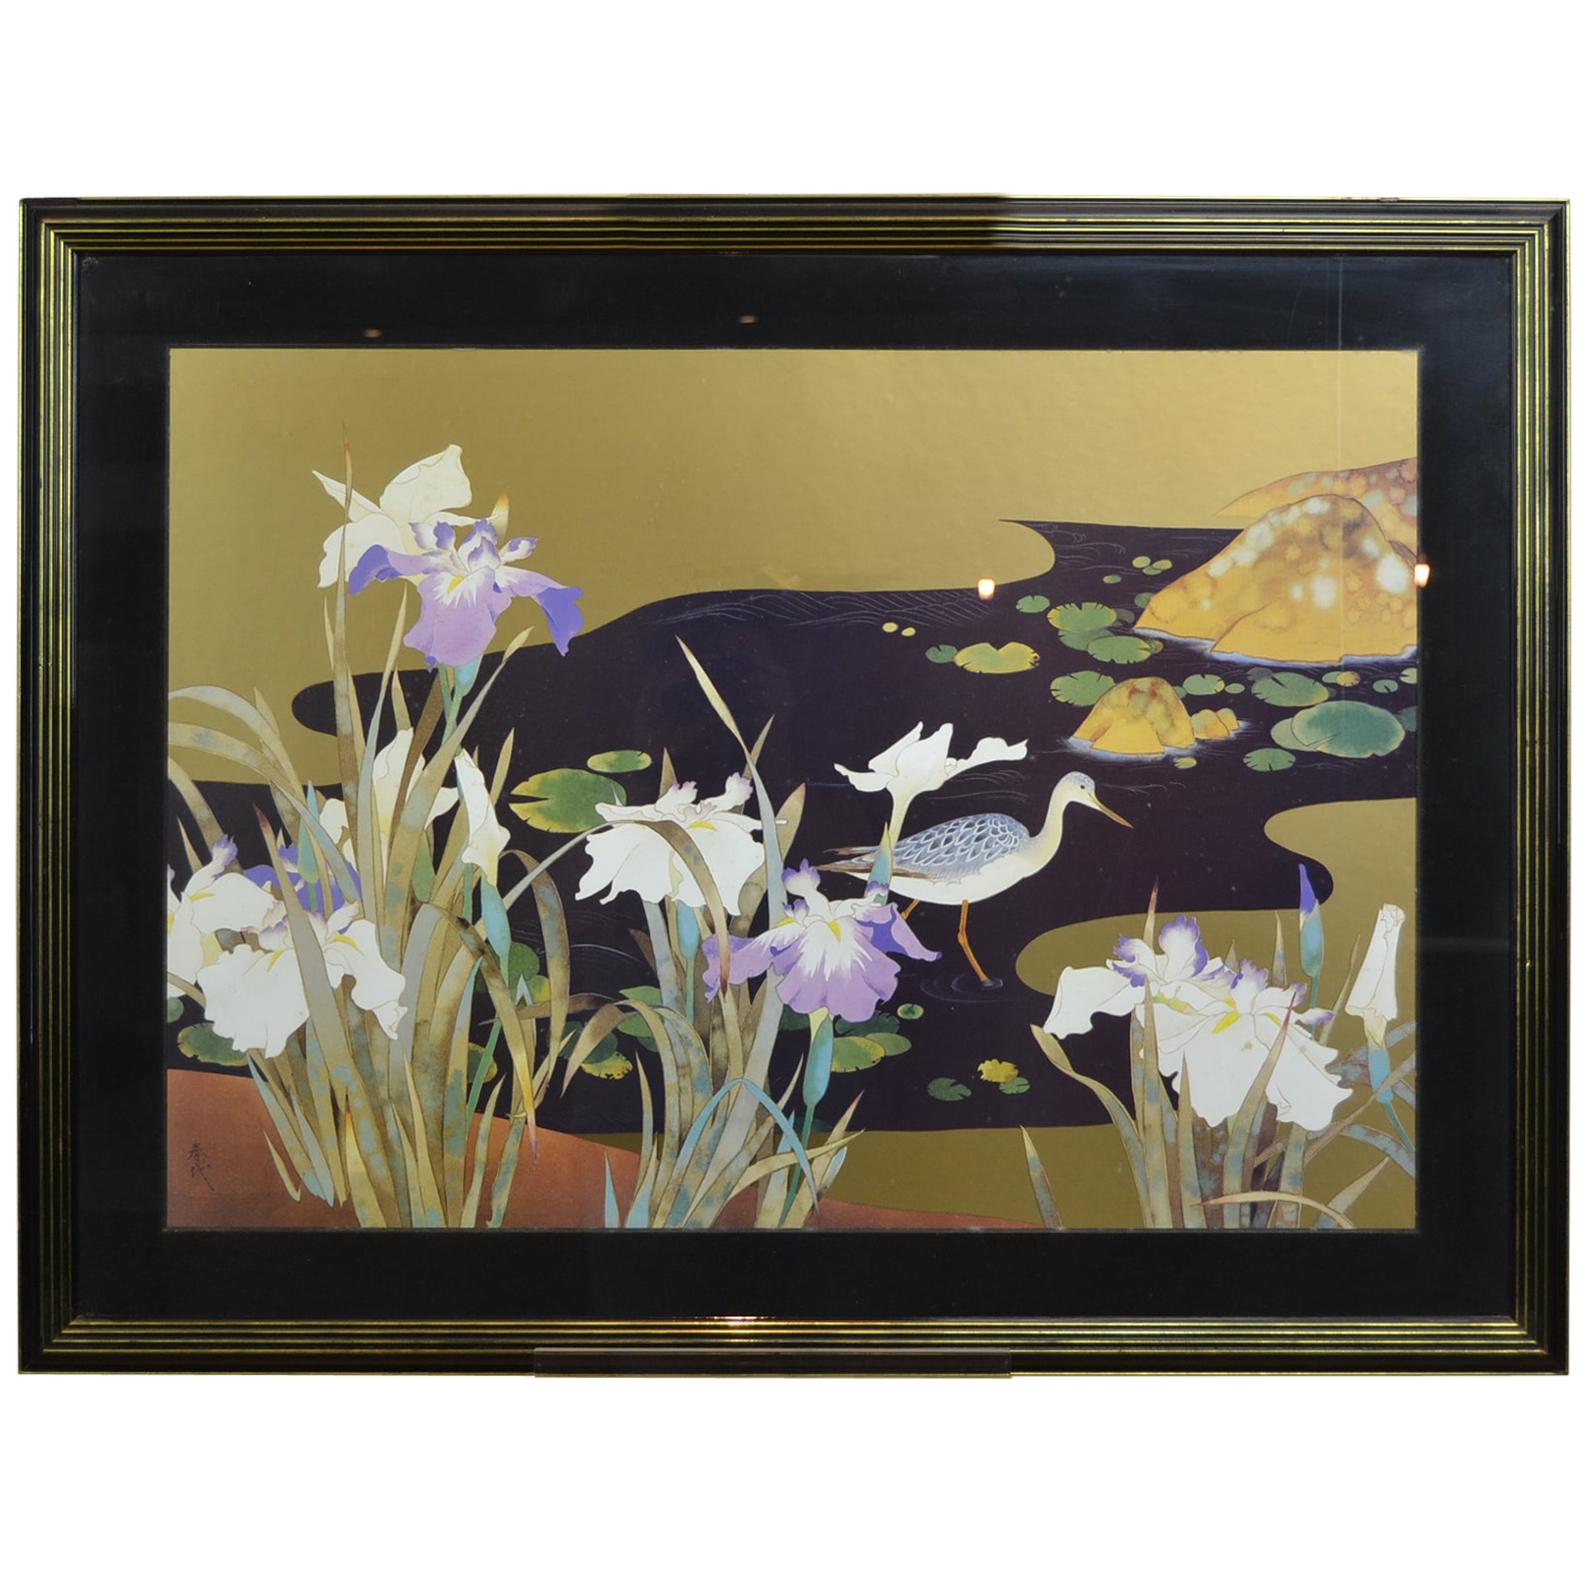 Vintage Framed Art Print with Bird, Cane and Flowers For Sale